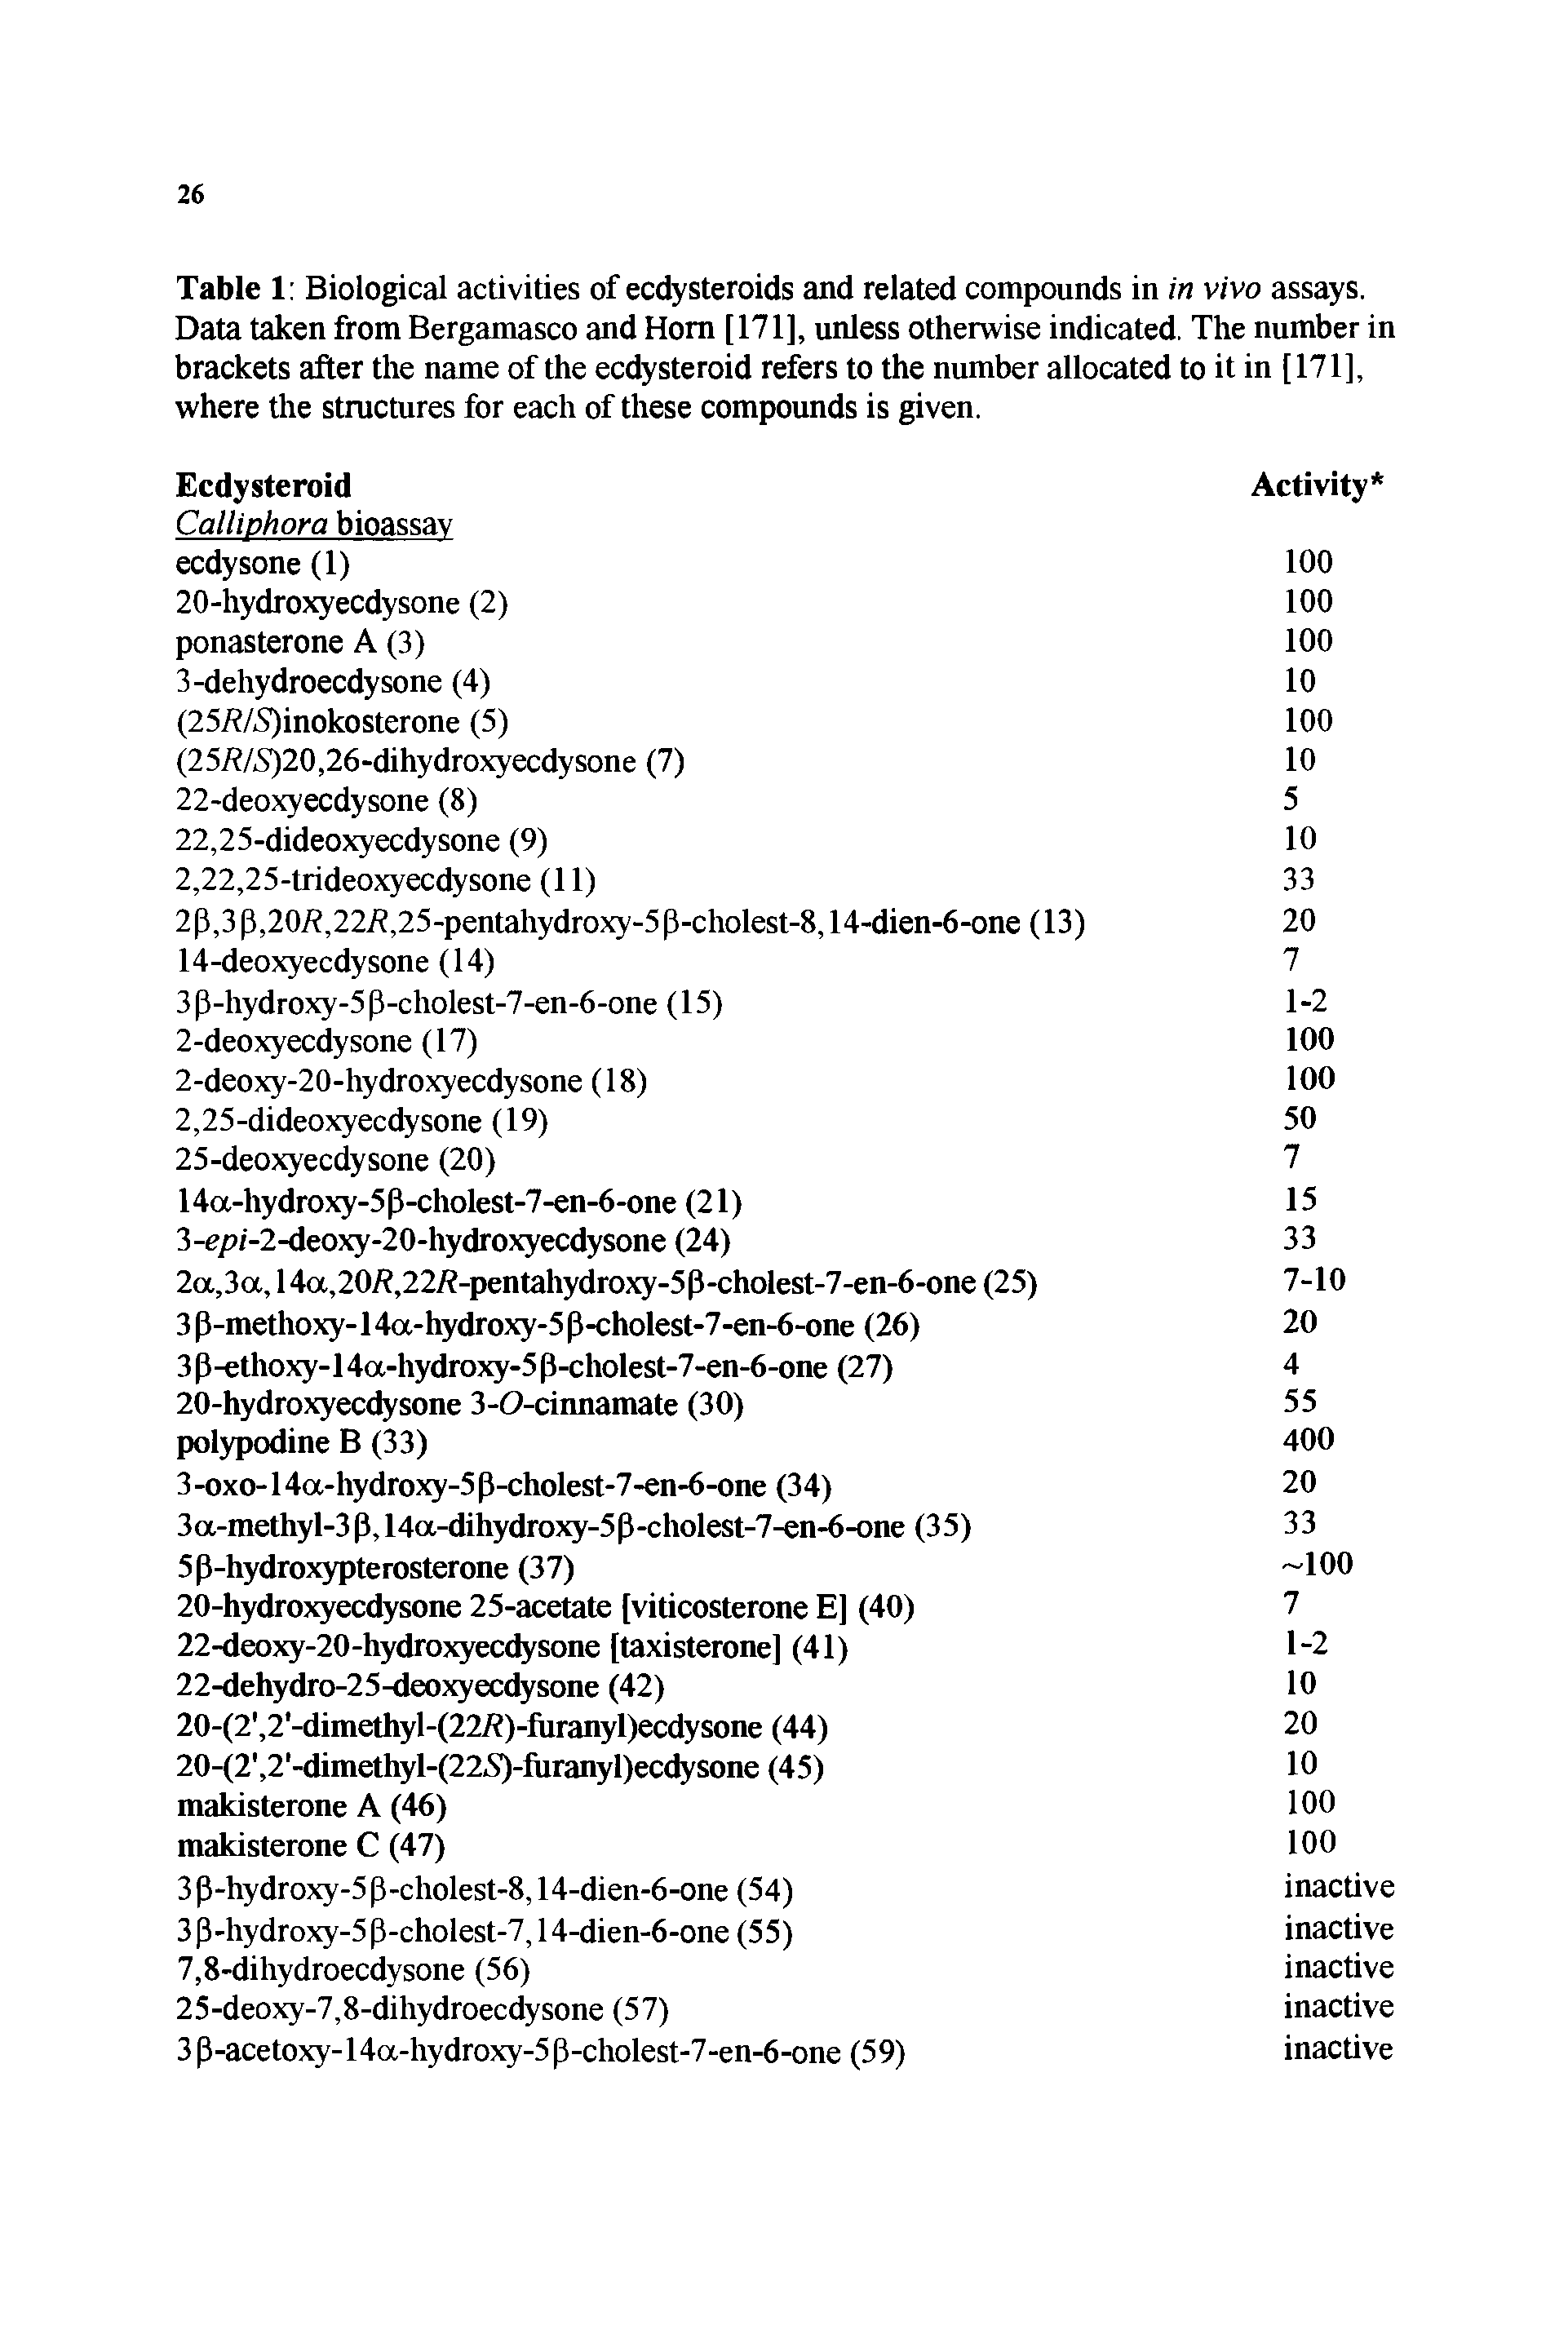 Table 1 Biological activities of ecdysteroids and related compounds in in vivo assays. Data taken from Bergamasco and Horn [171], unless otherwise indicated. The number in brackets after the name of the ecdysteroid refers to the number allocated to it in [171], where the structures for each of these compounds is given.